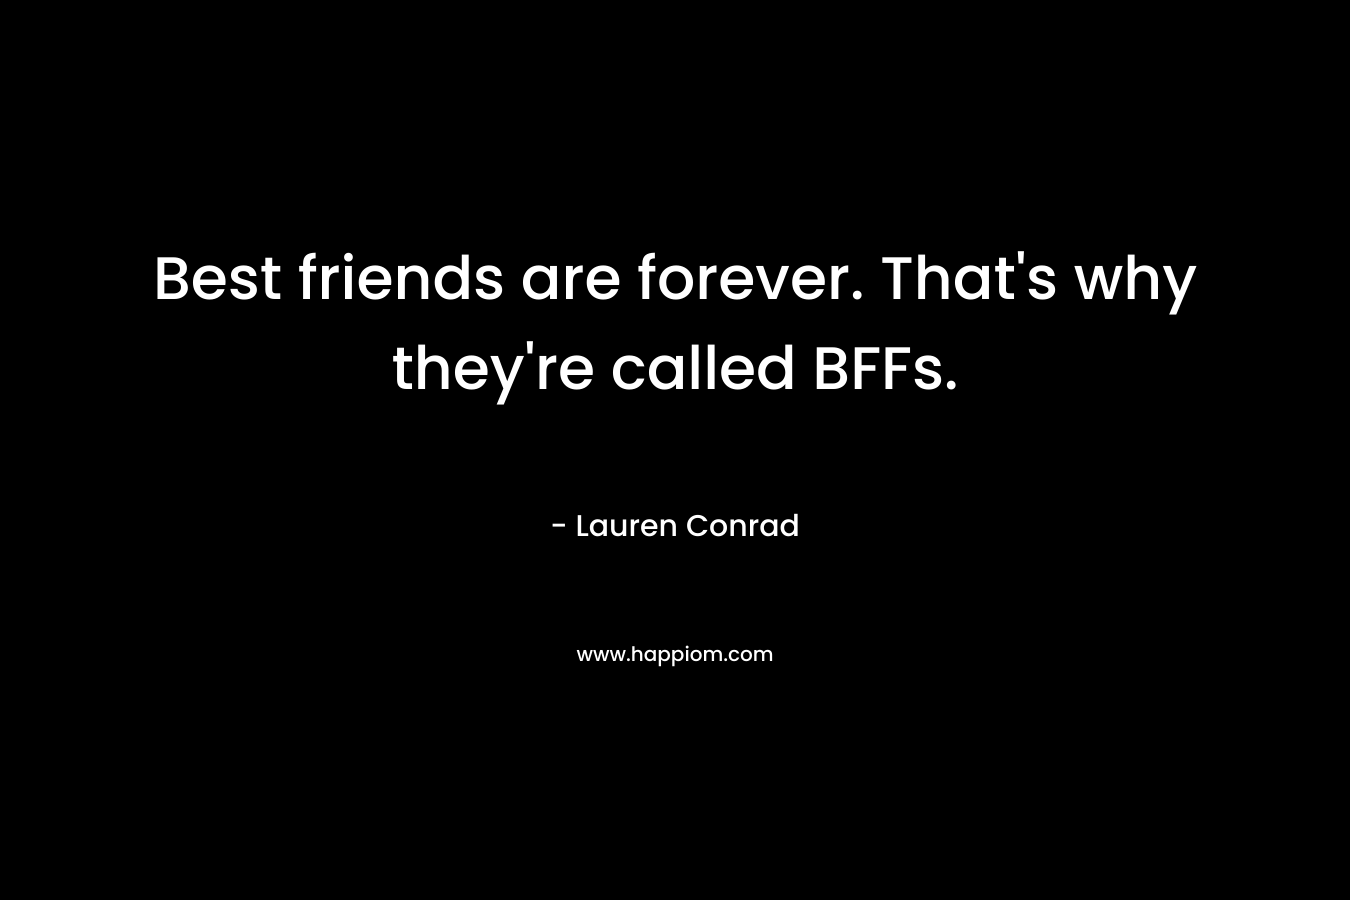 Best friends are forever. That's why they're called BFFs.